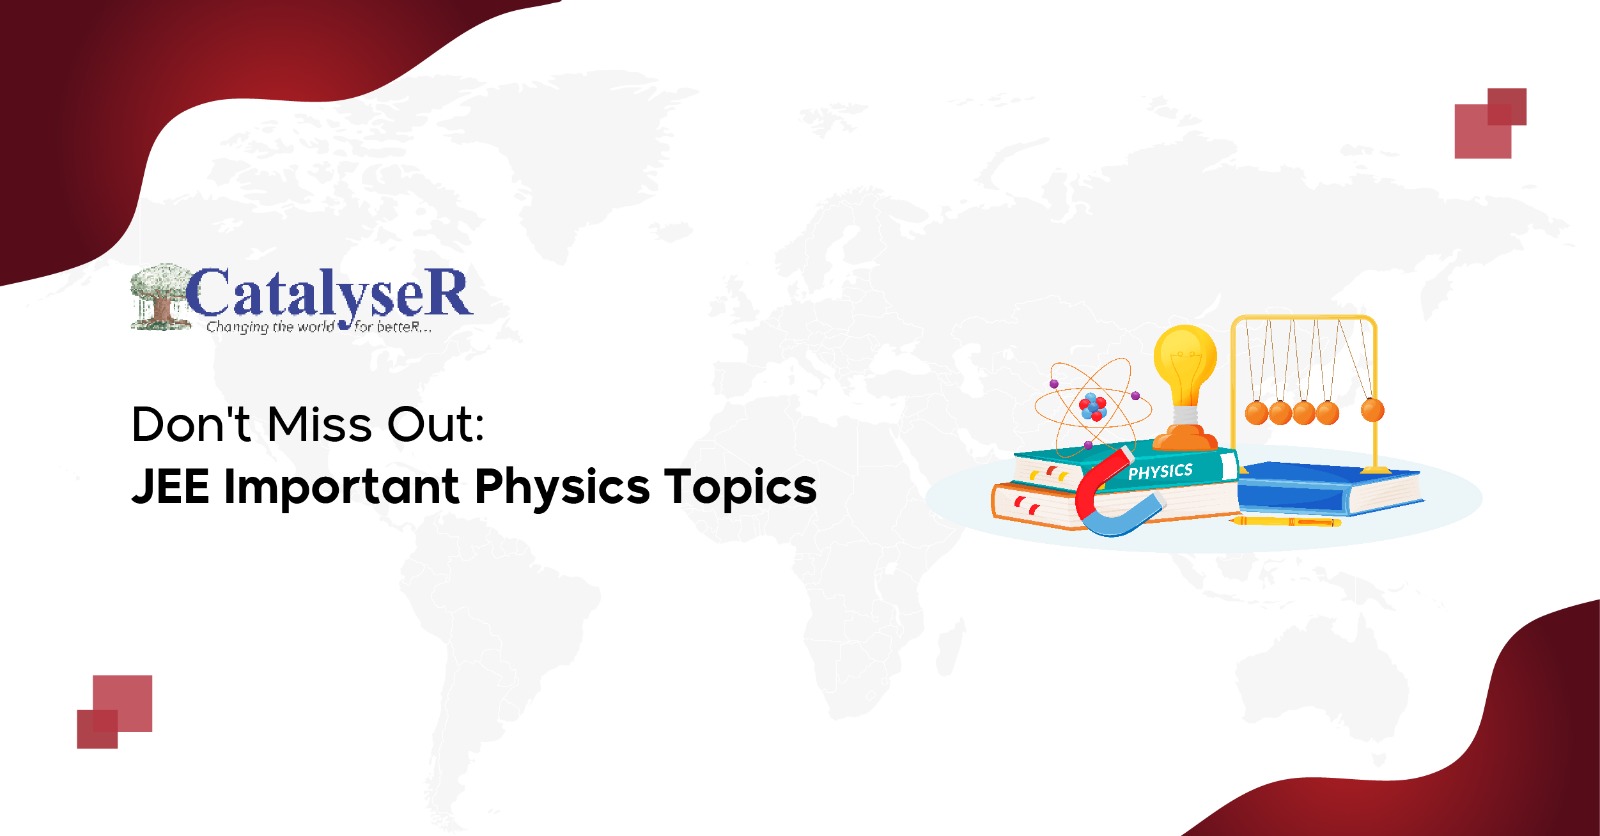 Don't Miss Out: JEE Important Physics Topics